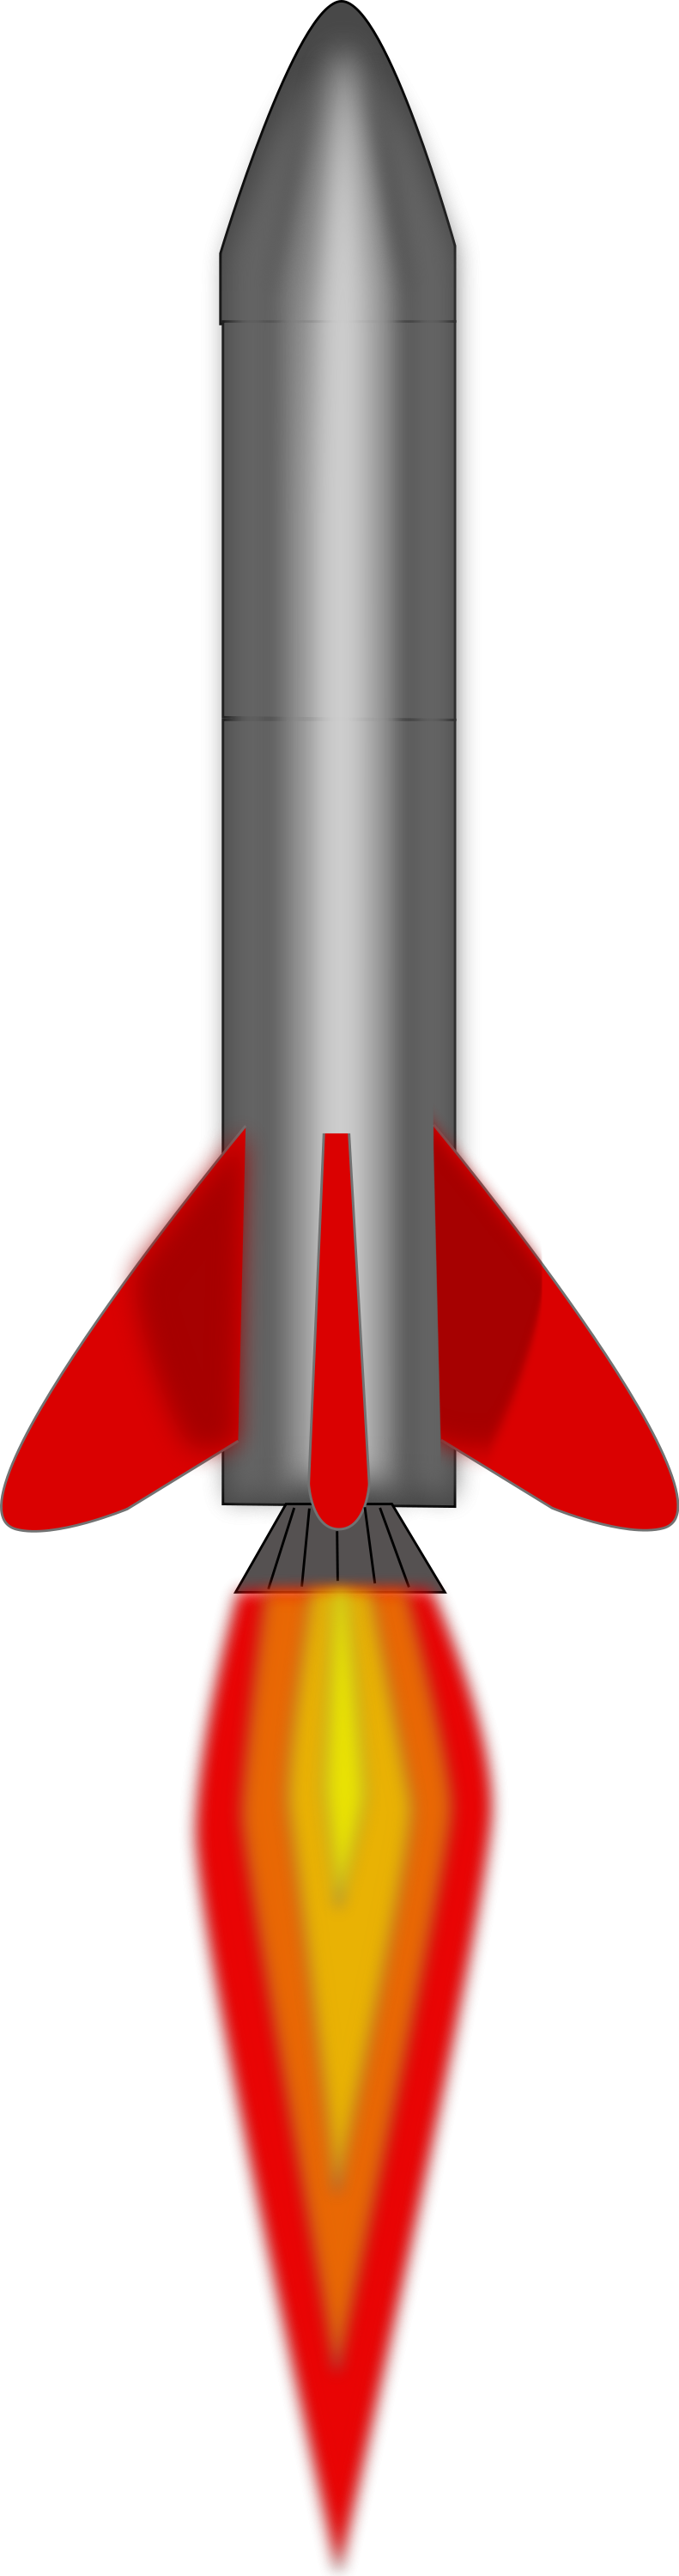 Cartoon Rocket Ship Clipart | Free download on ClipArtMag